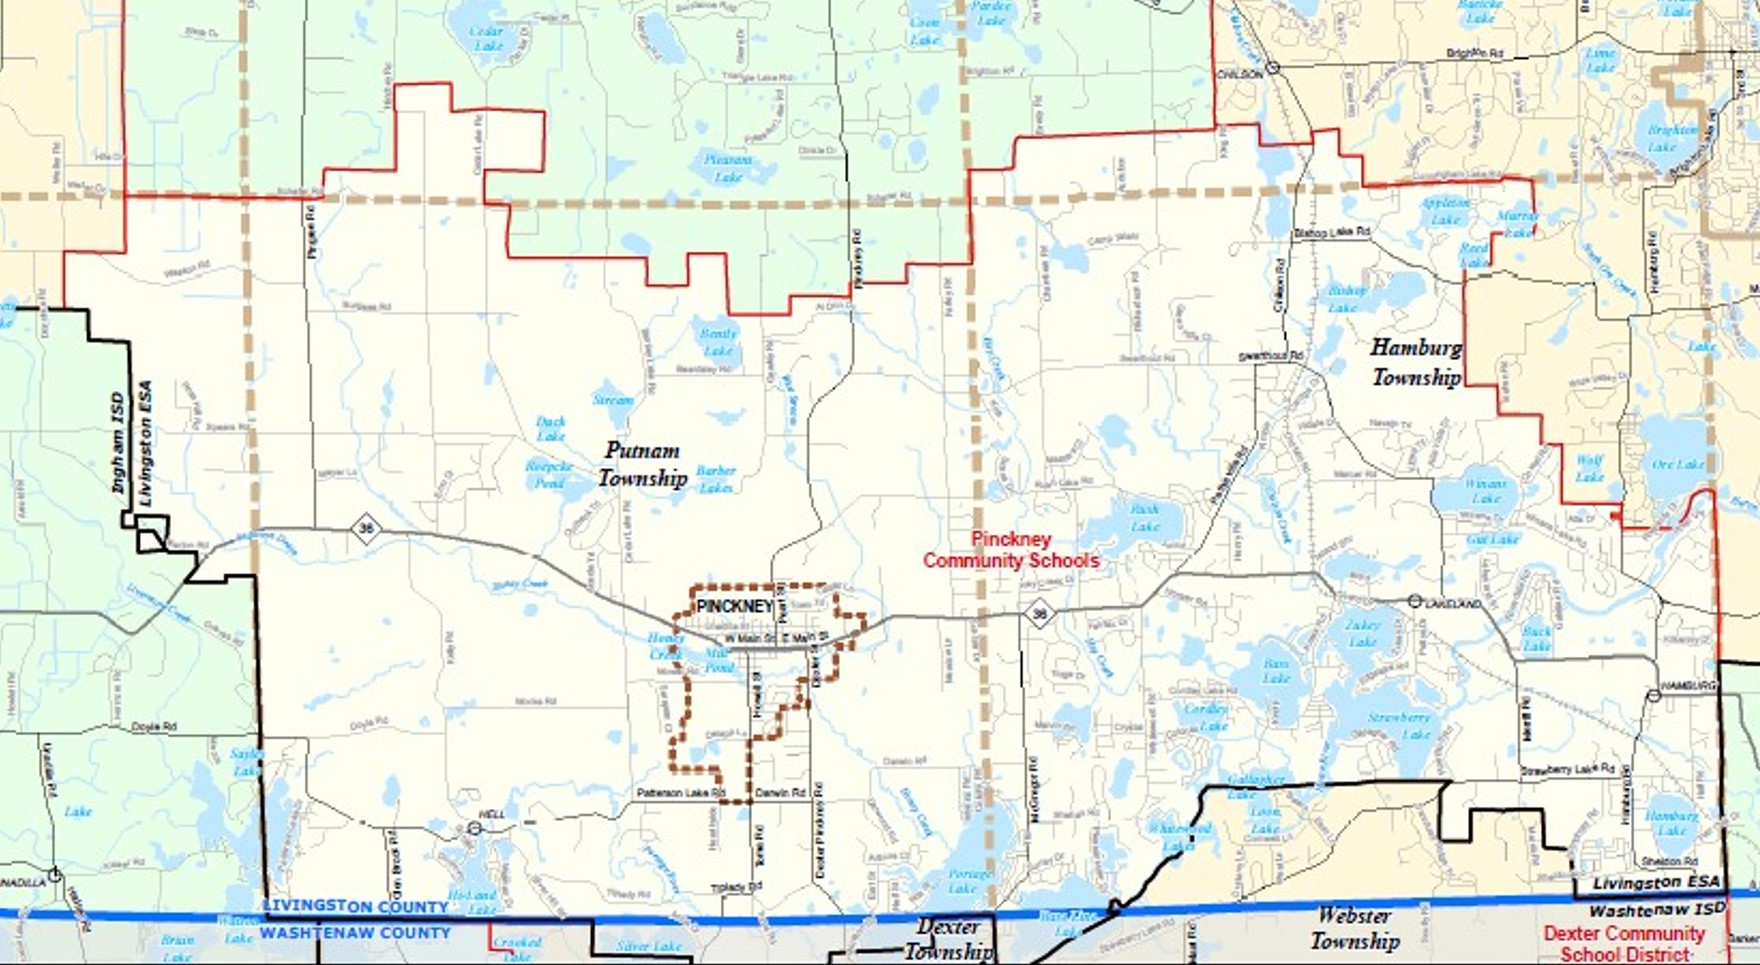 Pinckney District Boundry and Townships